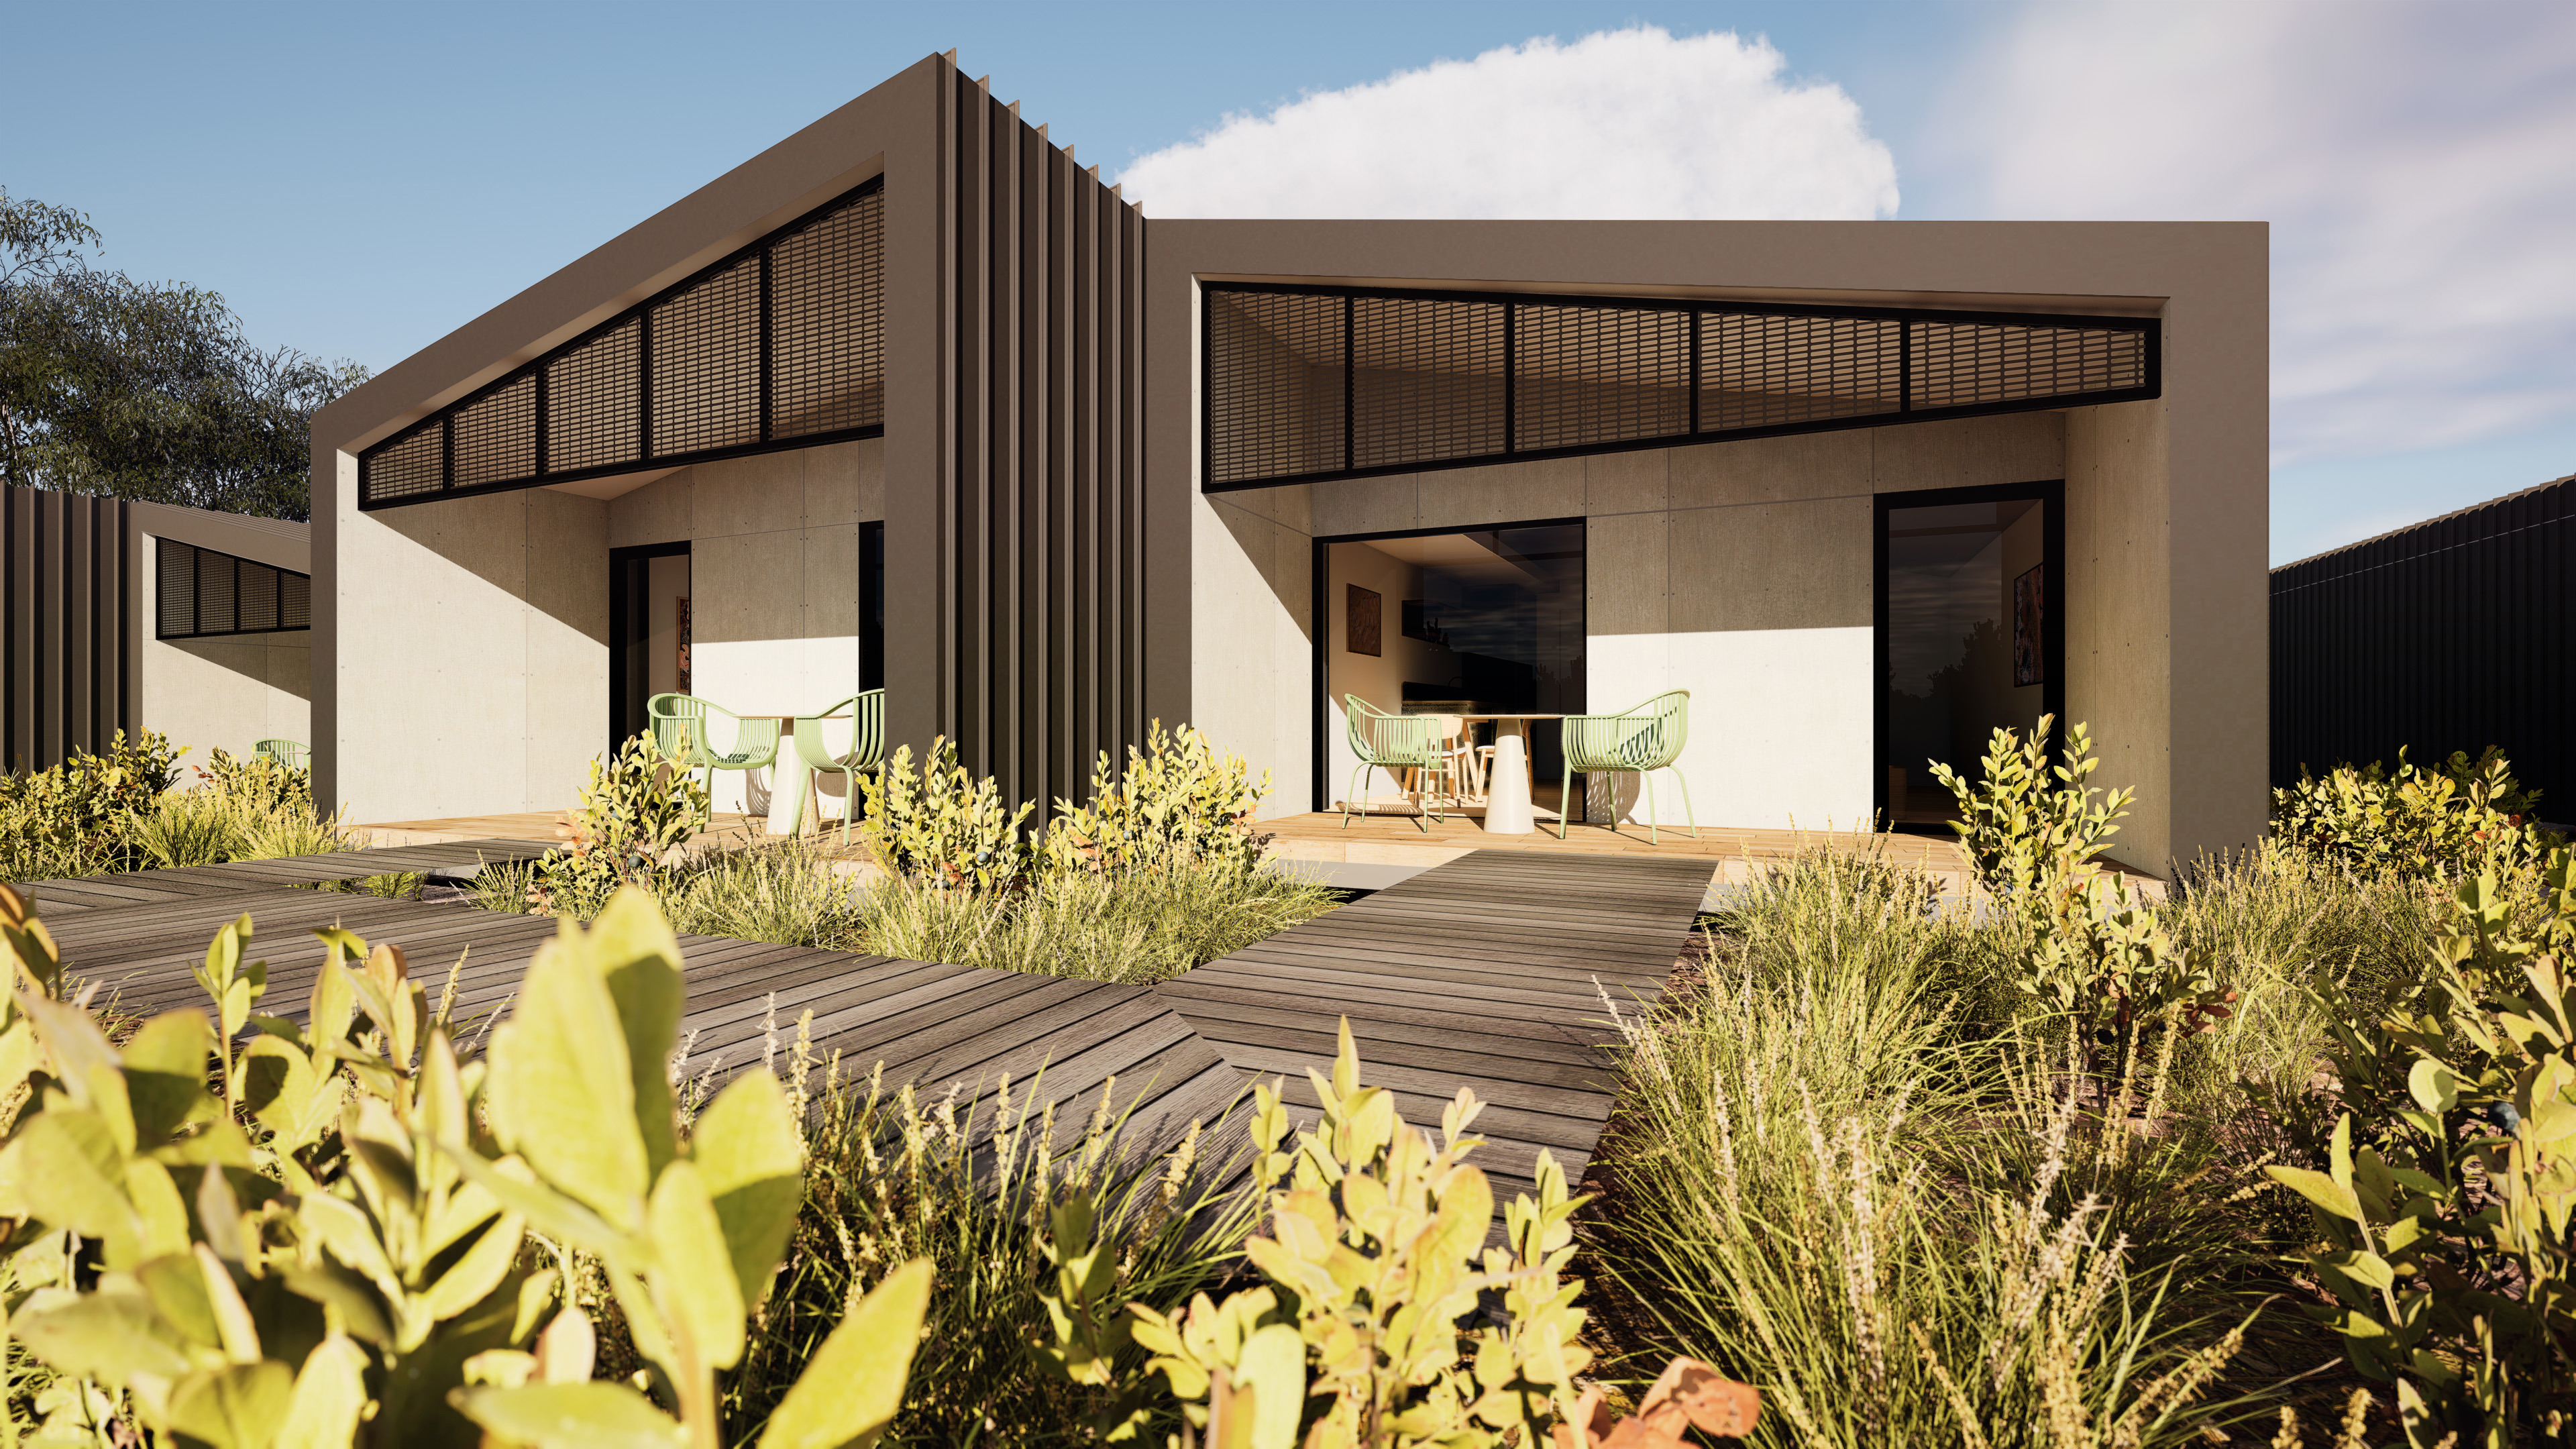 A West Australian mining company is reinventing FIFO working by building two new luxury accomodation precincts to attract female workers and "prioritise health and wellbeing."Mineral Resources is creating the hotel-style homes in the outback which it says are triple the size of the rooms staff usually have.